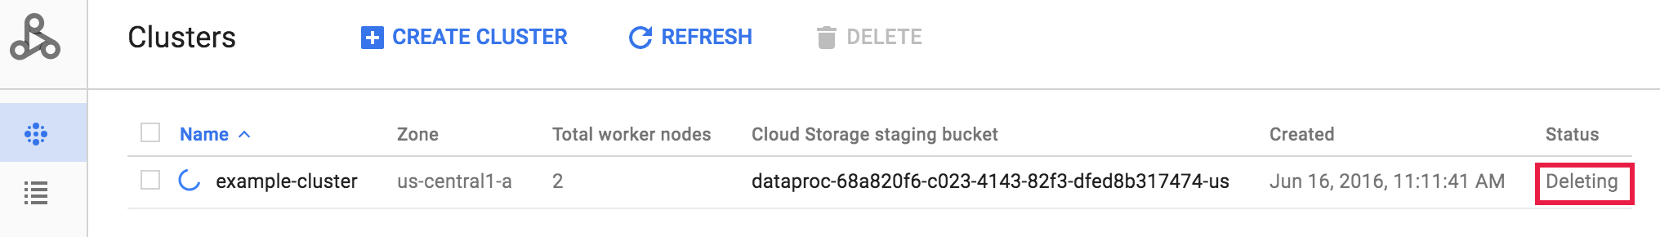 Dataproc cluster page confirms that the cluster is deleted.